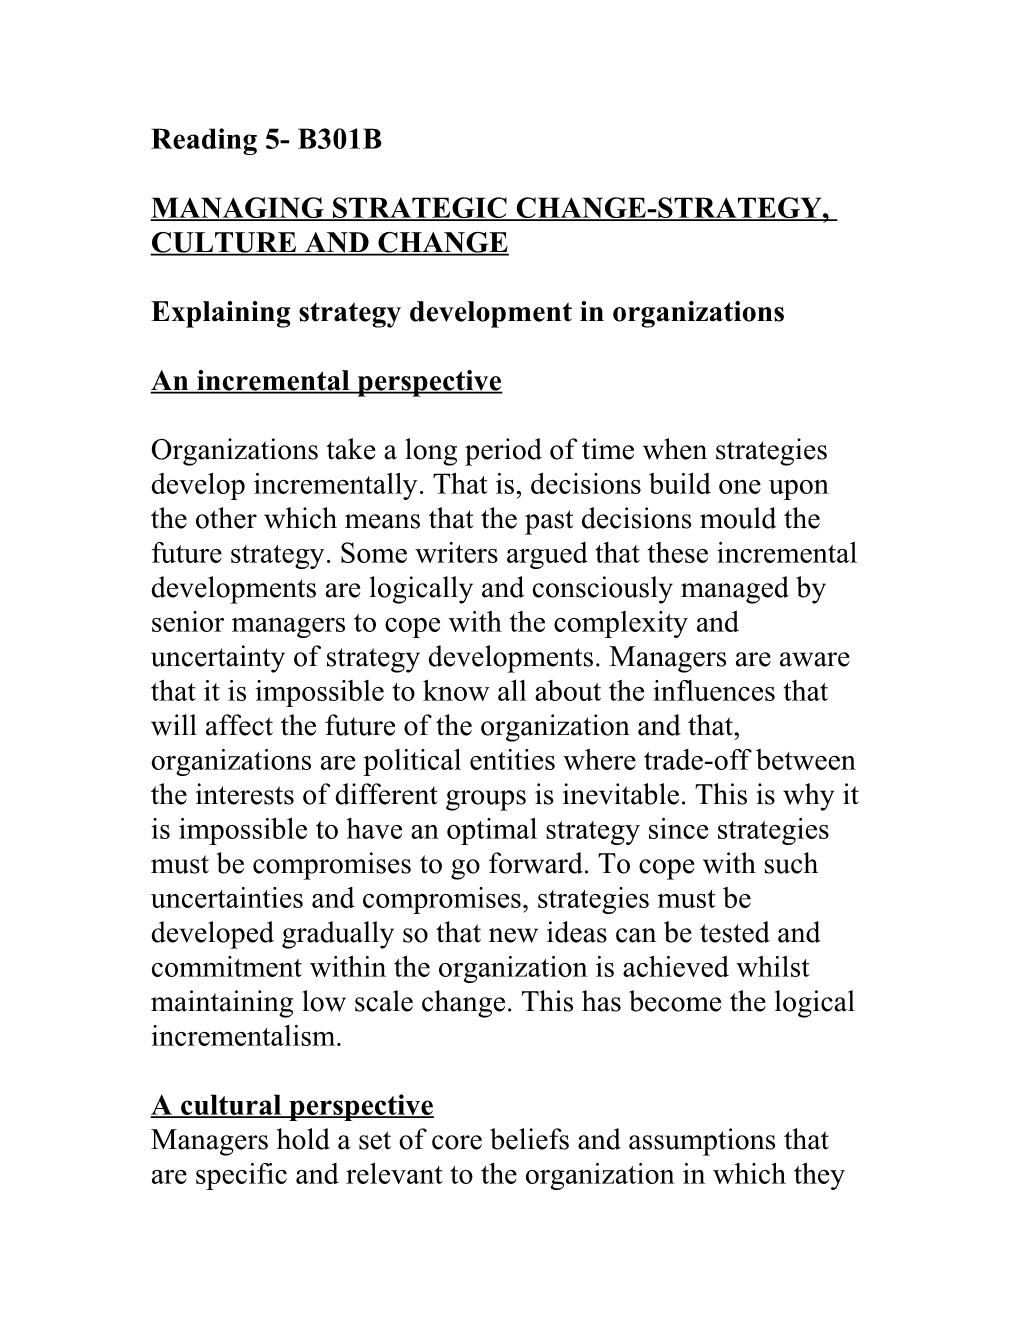 Managing Strategic Change-Strategy, Culture and Change